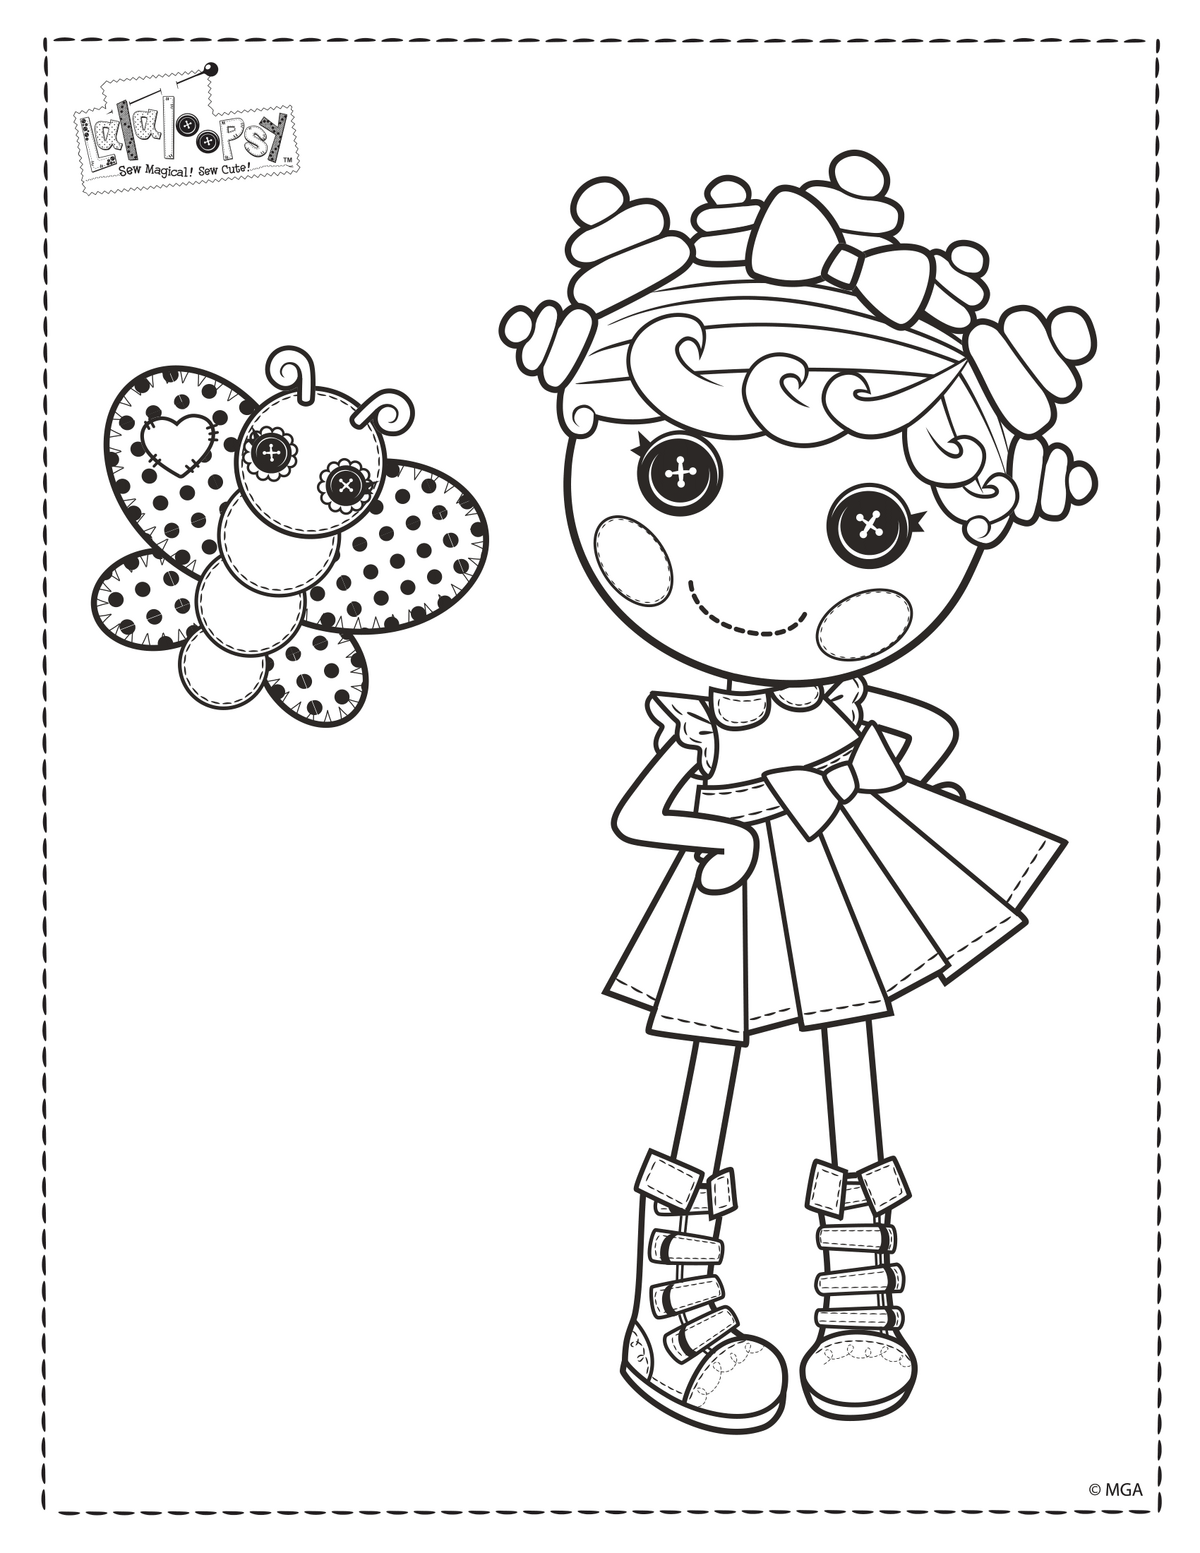 Squiggles N' Shapes/animation | Lalaloopsy Land Wiki | Fandom